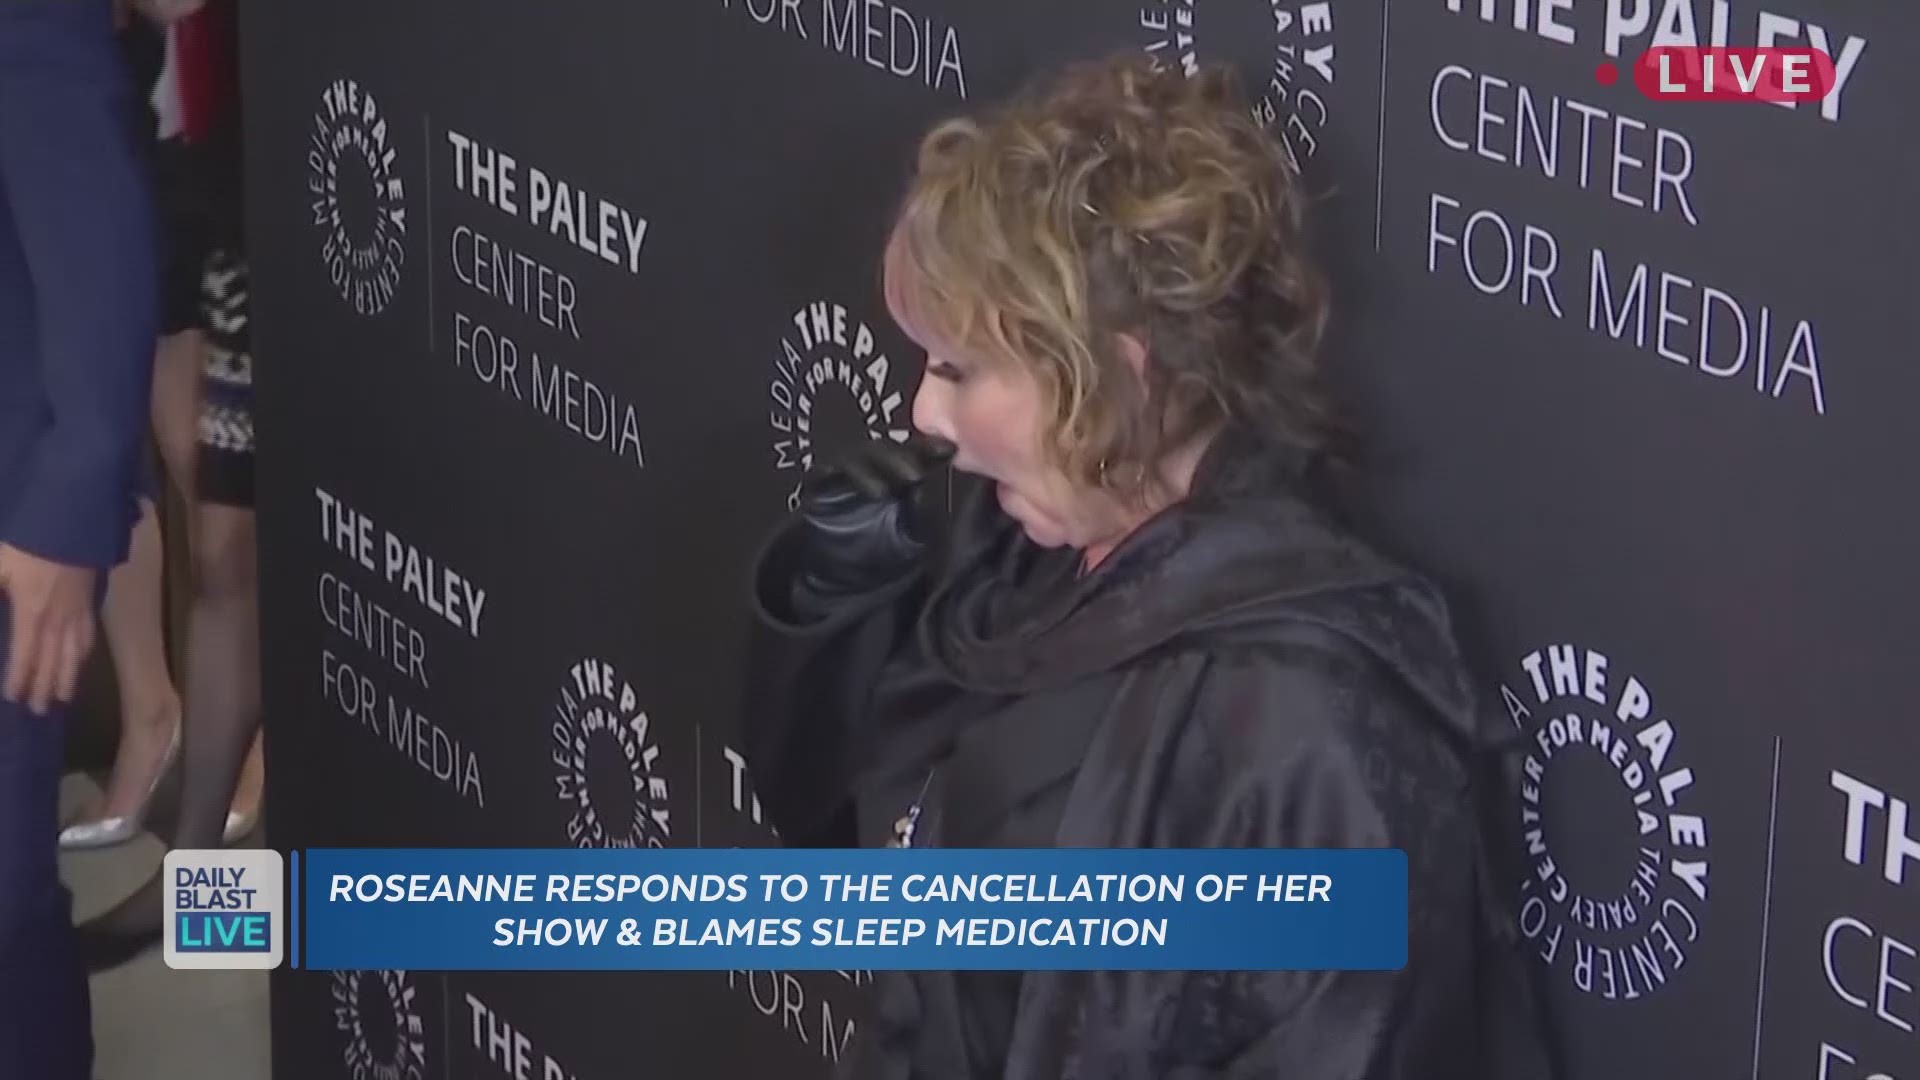 In the wake of her ABC show's cancellation, Roseanne returned to Twitter to blame her racist tweet on her sleep medication, Ambien. A representative from the company that makes Ambien responded saying, "While all pharmaceutical treatments have side effect